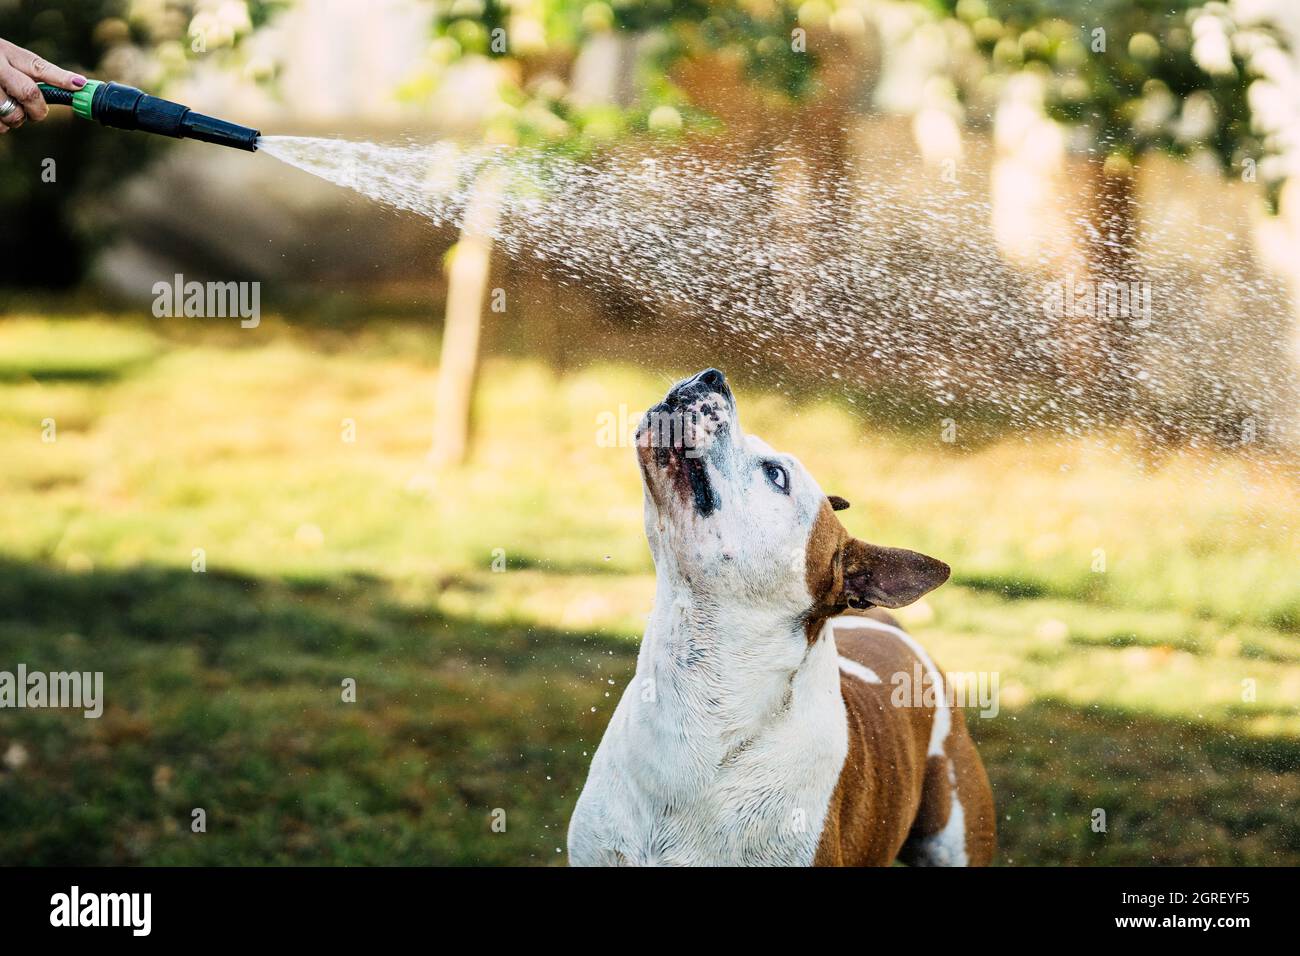 Person playing with a dog with the water form a hosepipe in a garden Stock Photo